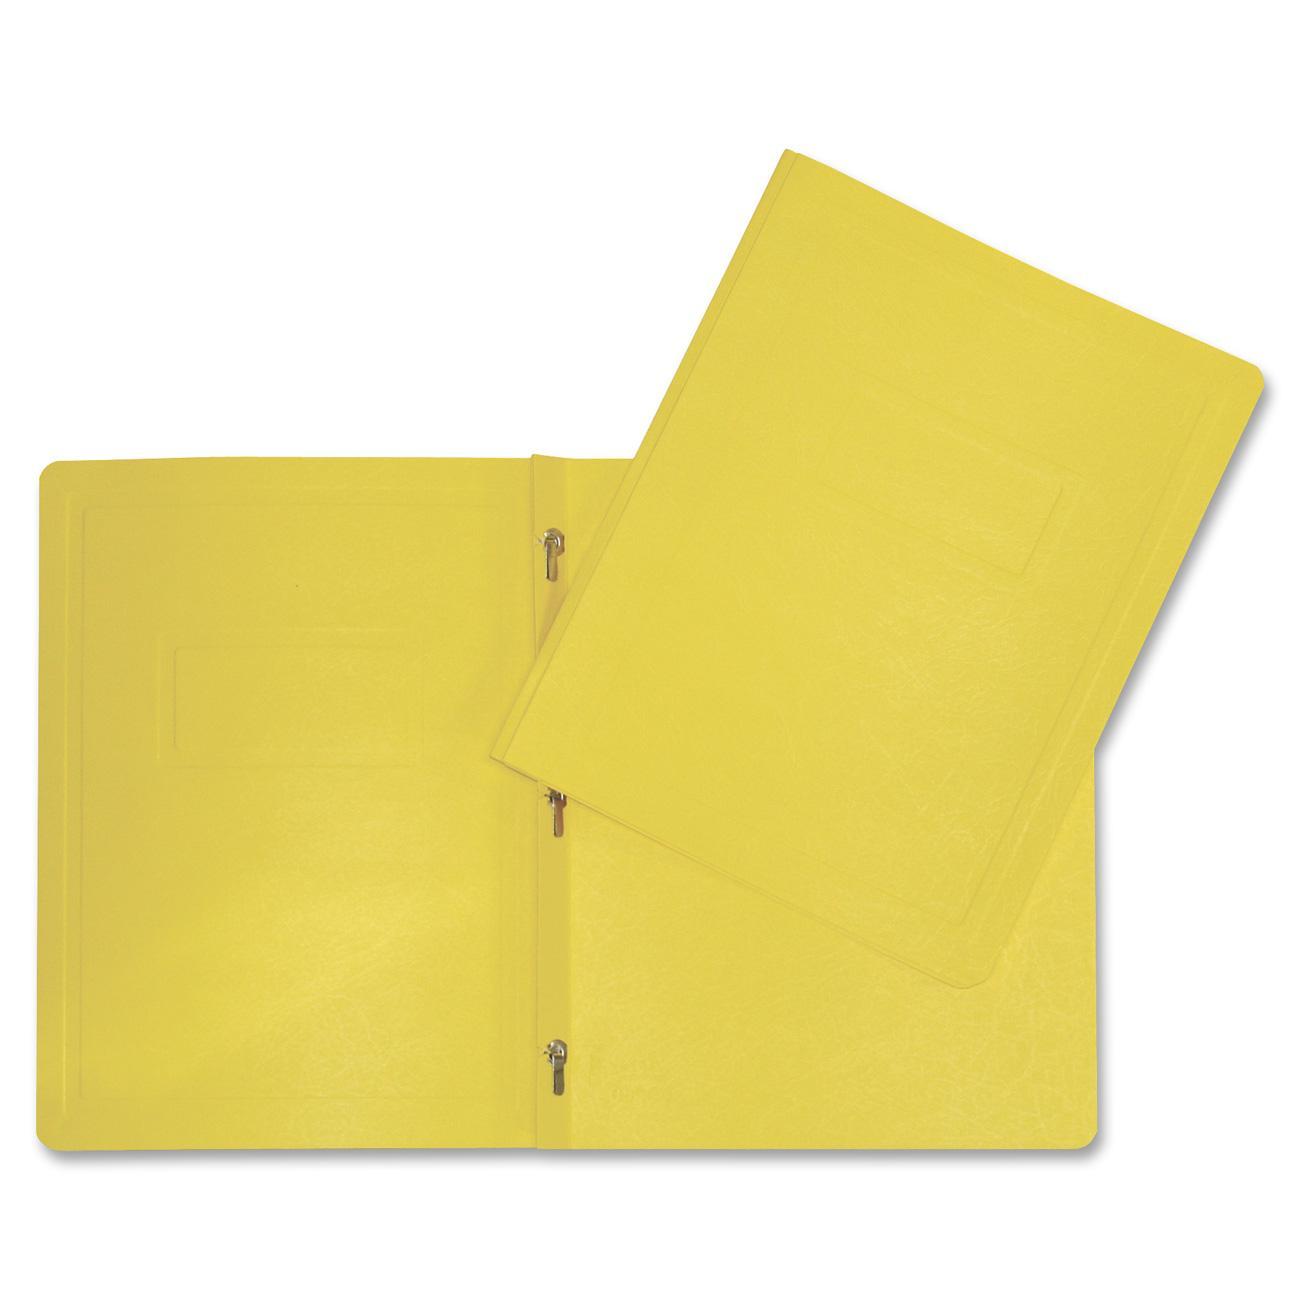 Hilroy Brief Cover, Yellow